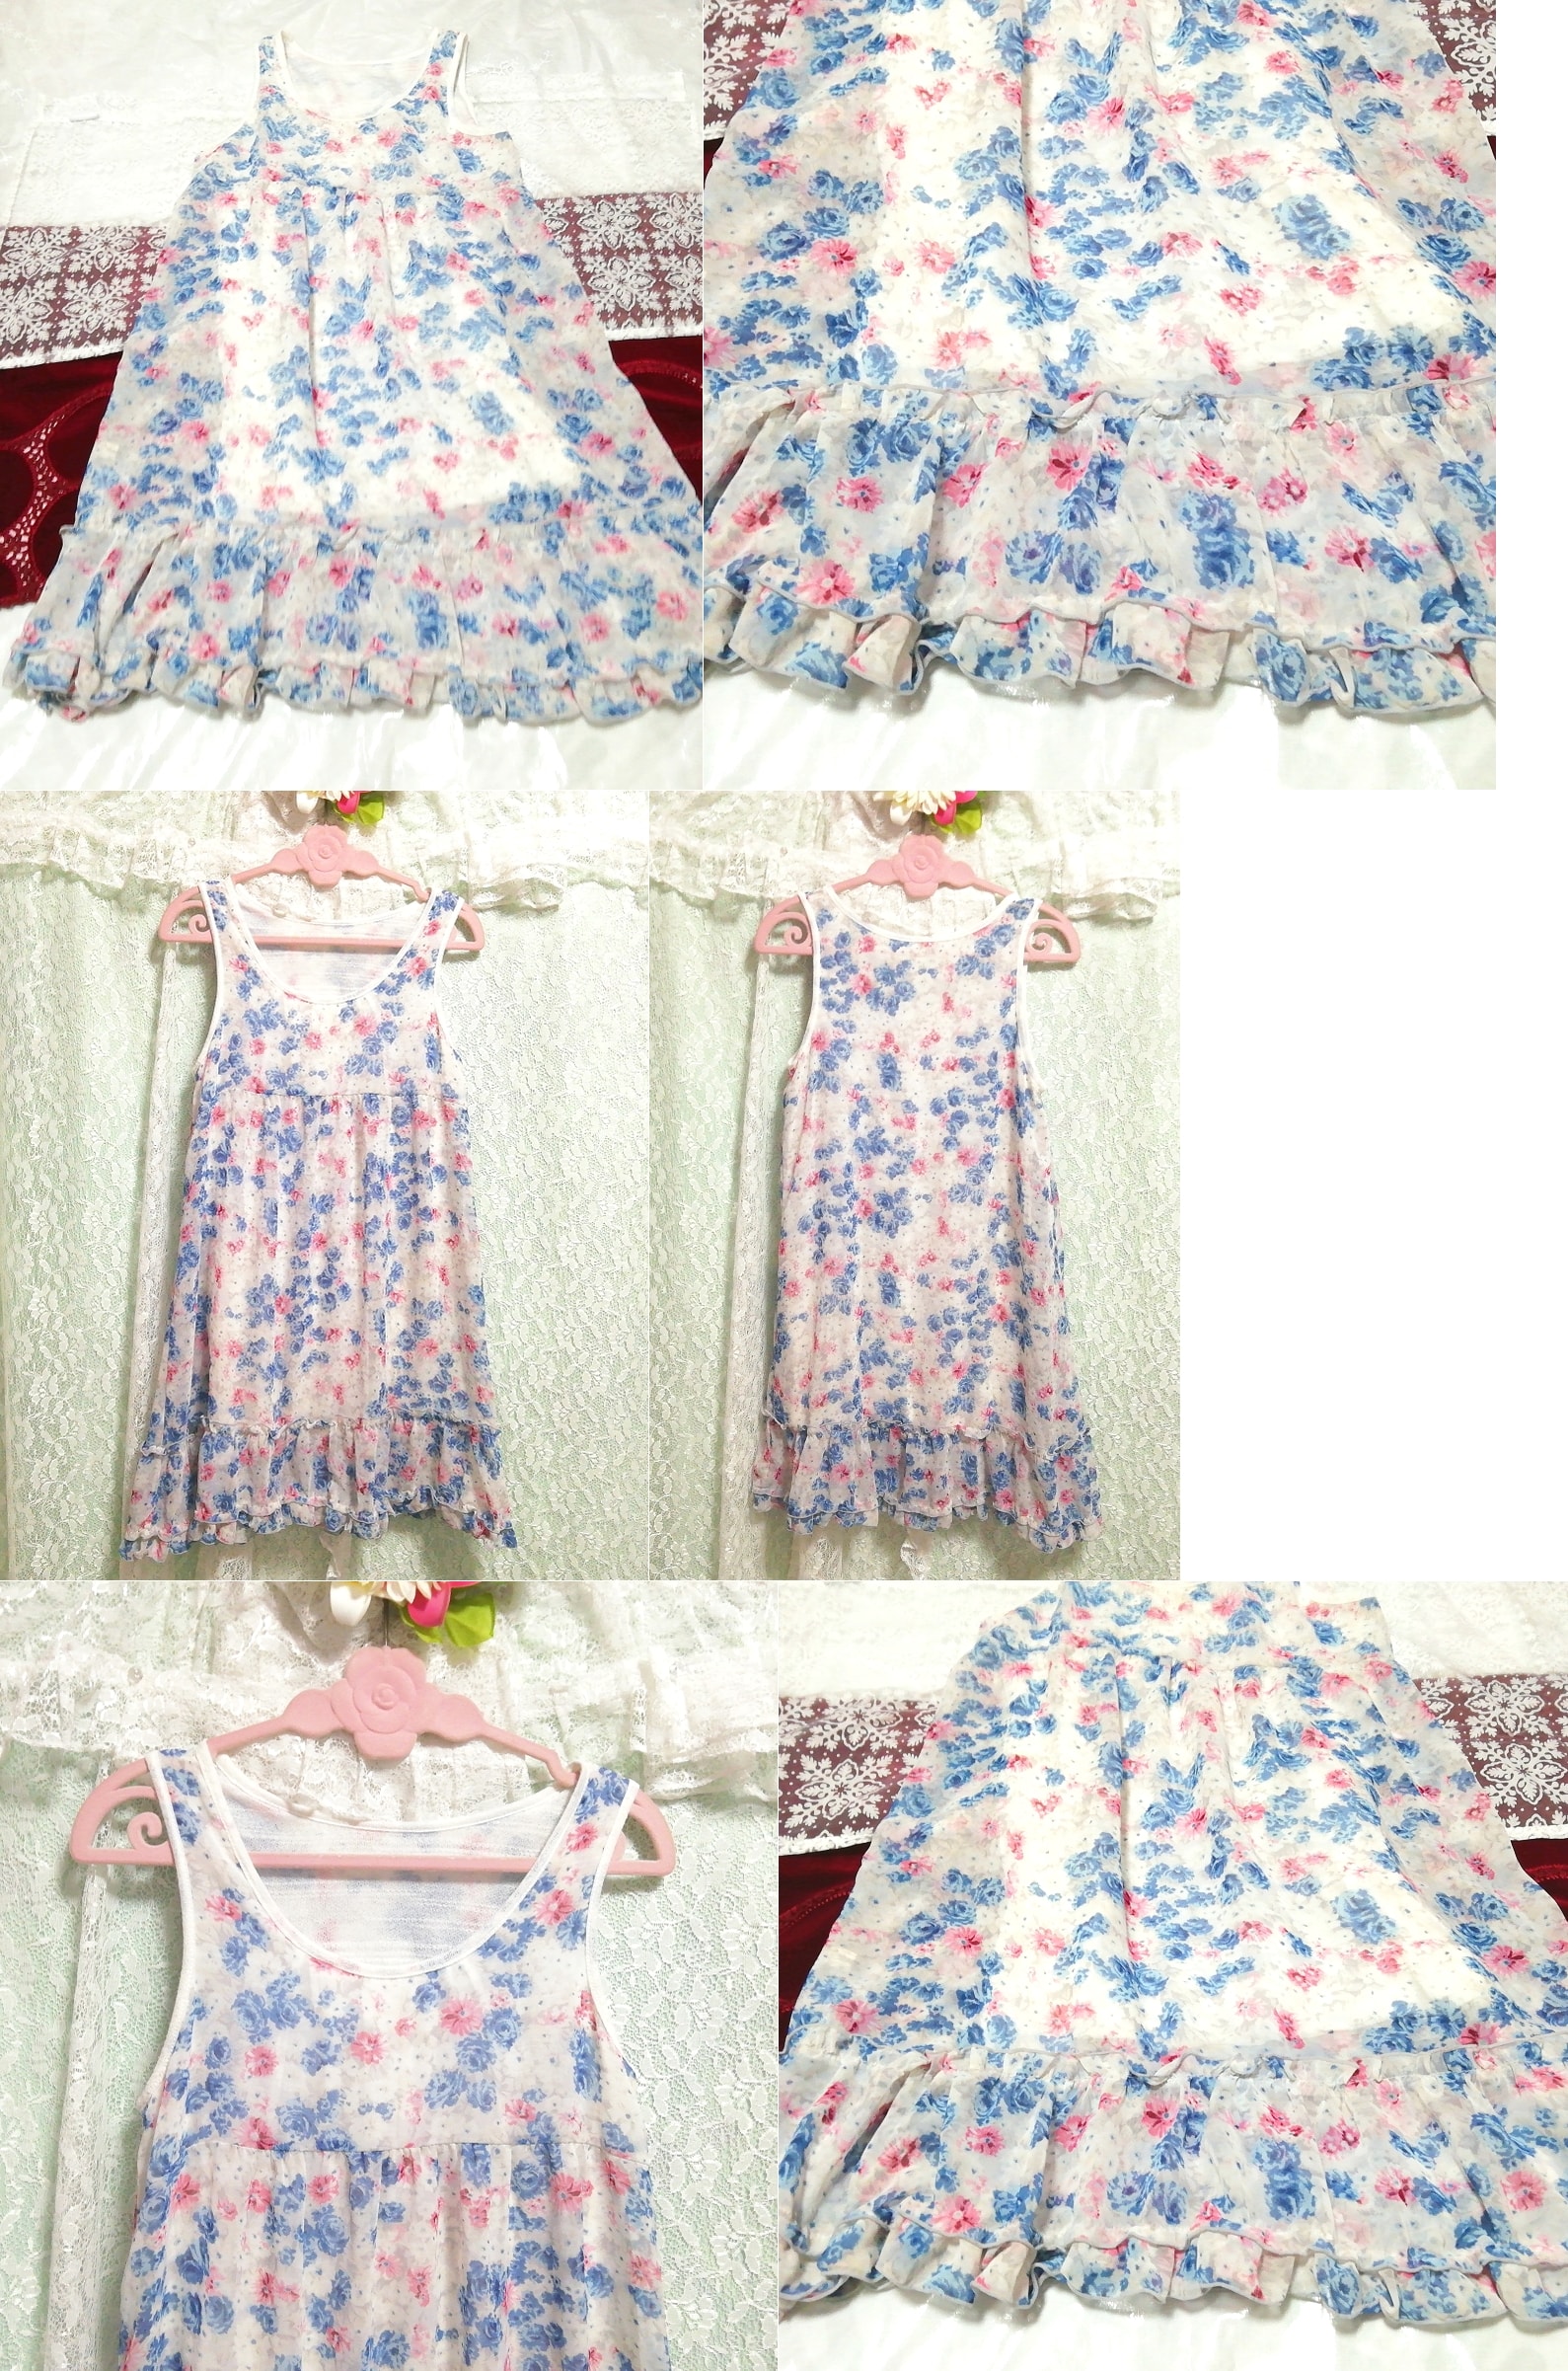 Blue red white floral pattern chiffon negligee nightgown tunic dress, knee length skirt, m size